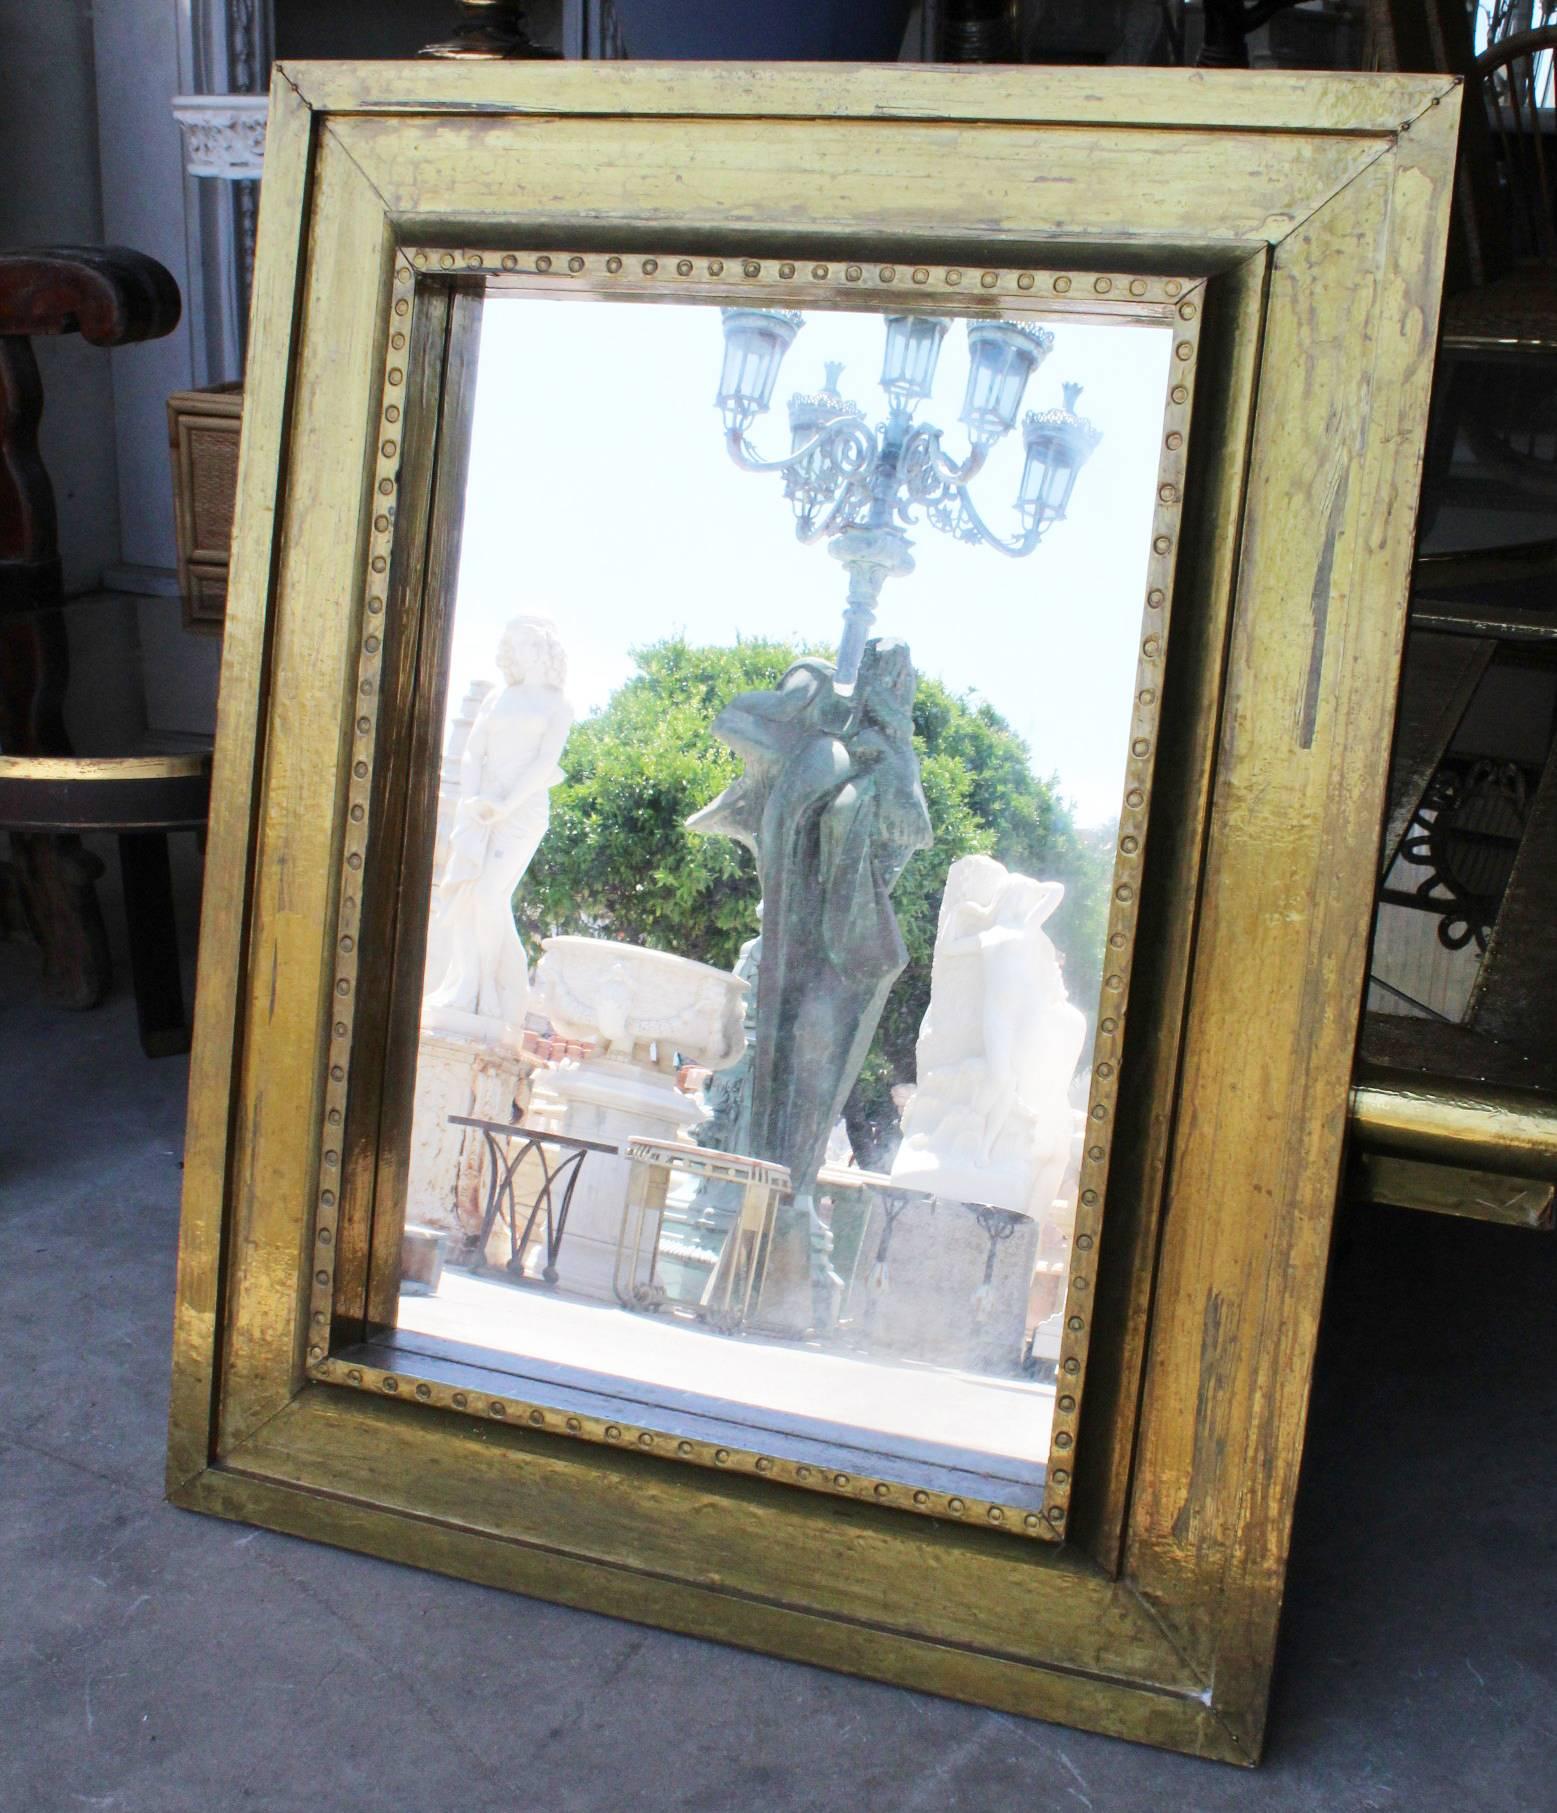 1970s handcrafted gilded brass panels stamped over a wooden frame mirror by Rodolfo Dubarry's workshop in Marbella. 

50 years ago, Argentinian furniture designer Rodolfo Dubarry set up a workshop in Spain and popularised the use of gilded brass